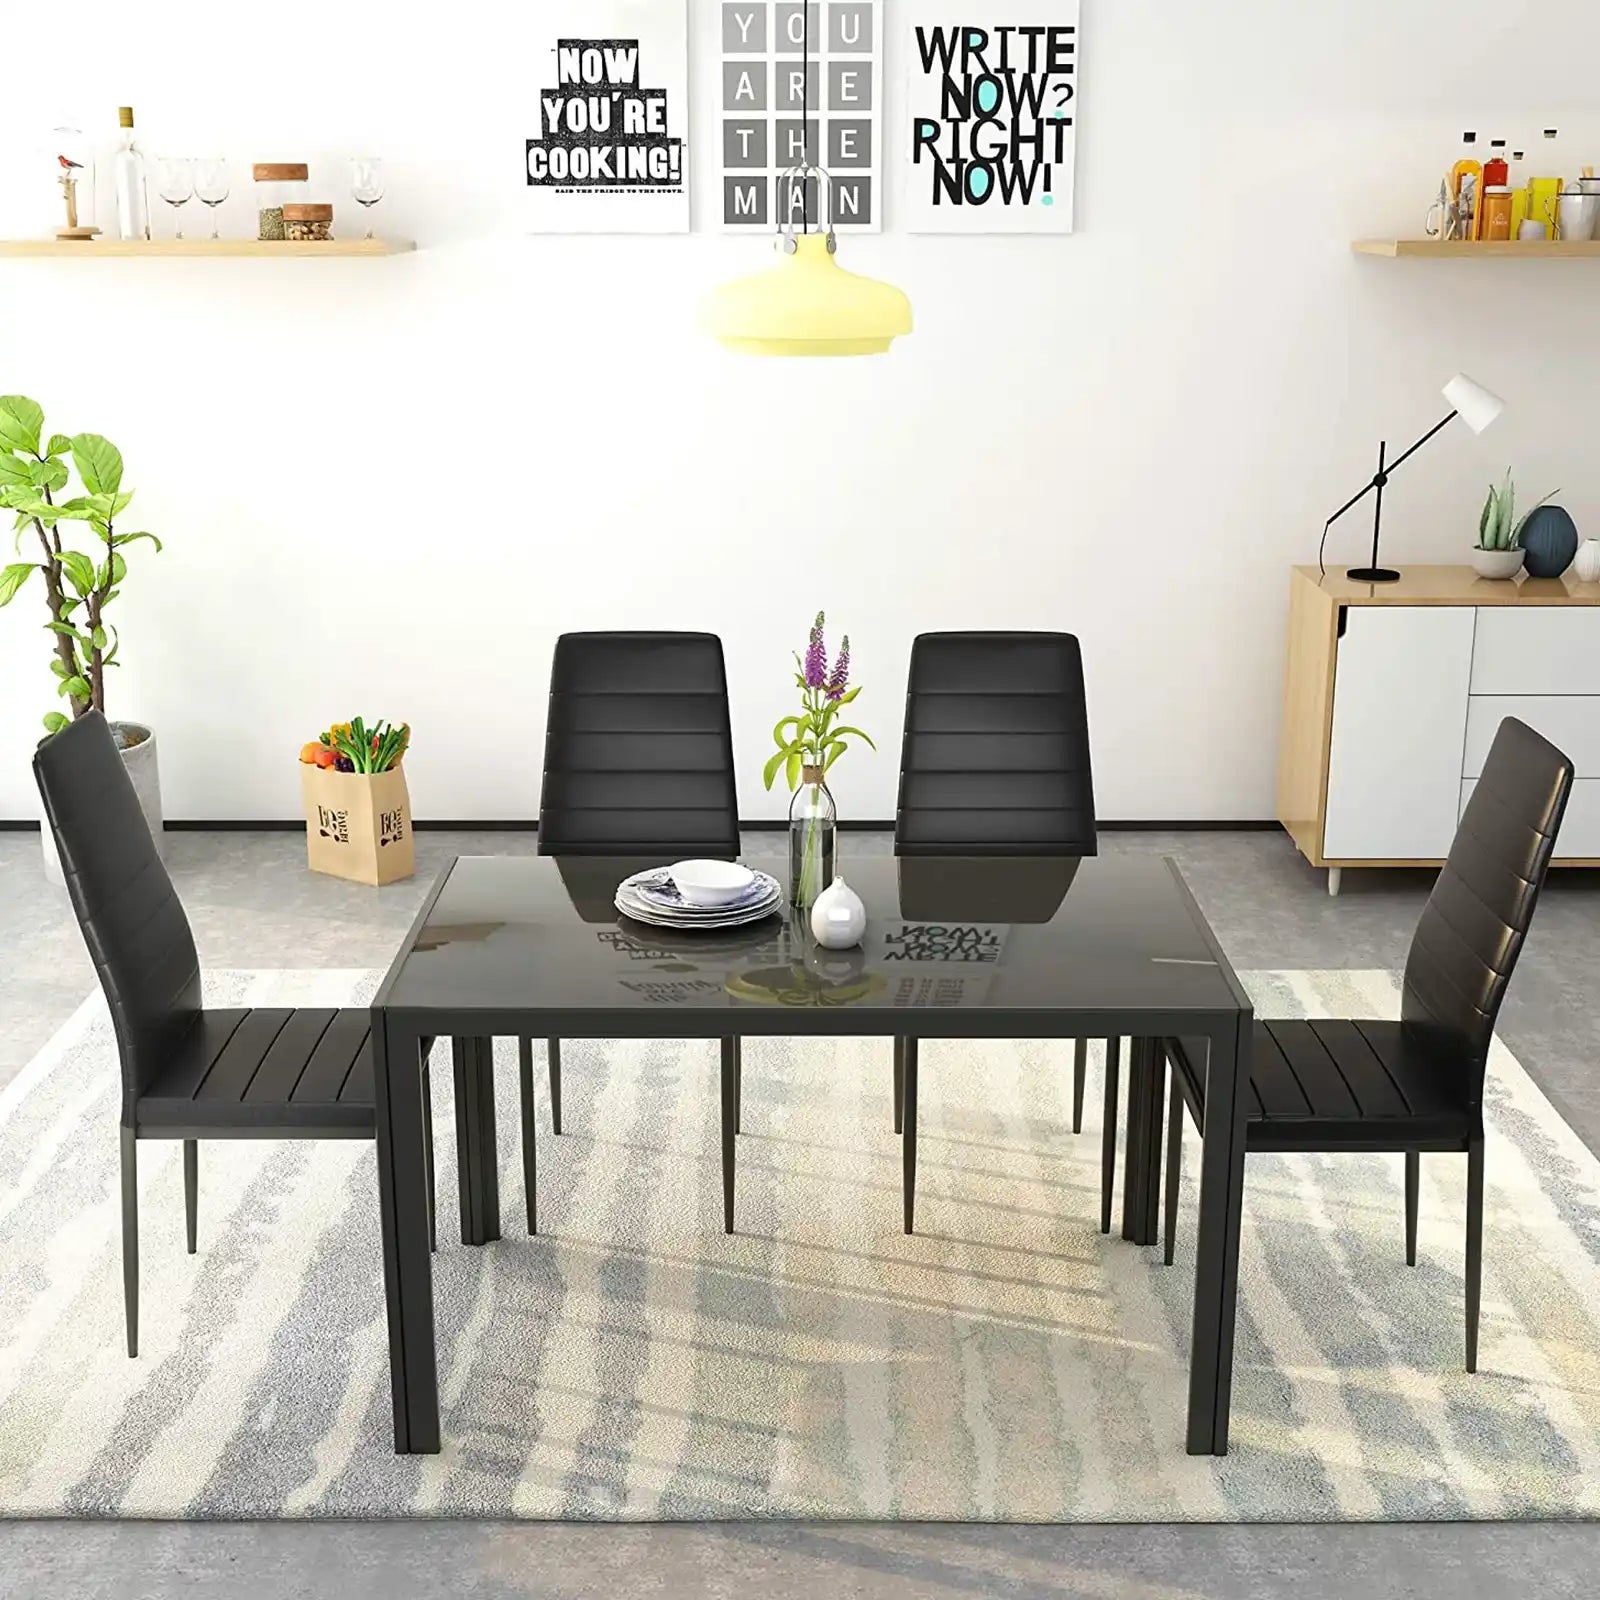 Dining Set with Tempered Glass Tabletop and 4 Faux Leather Chairs